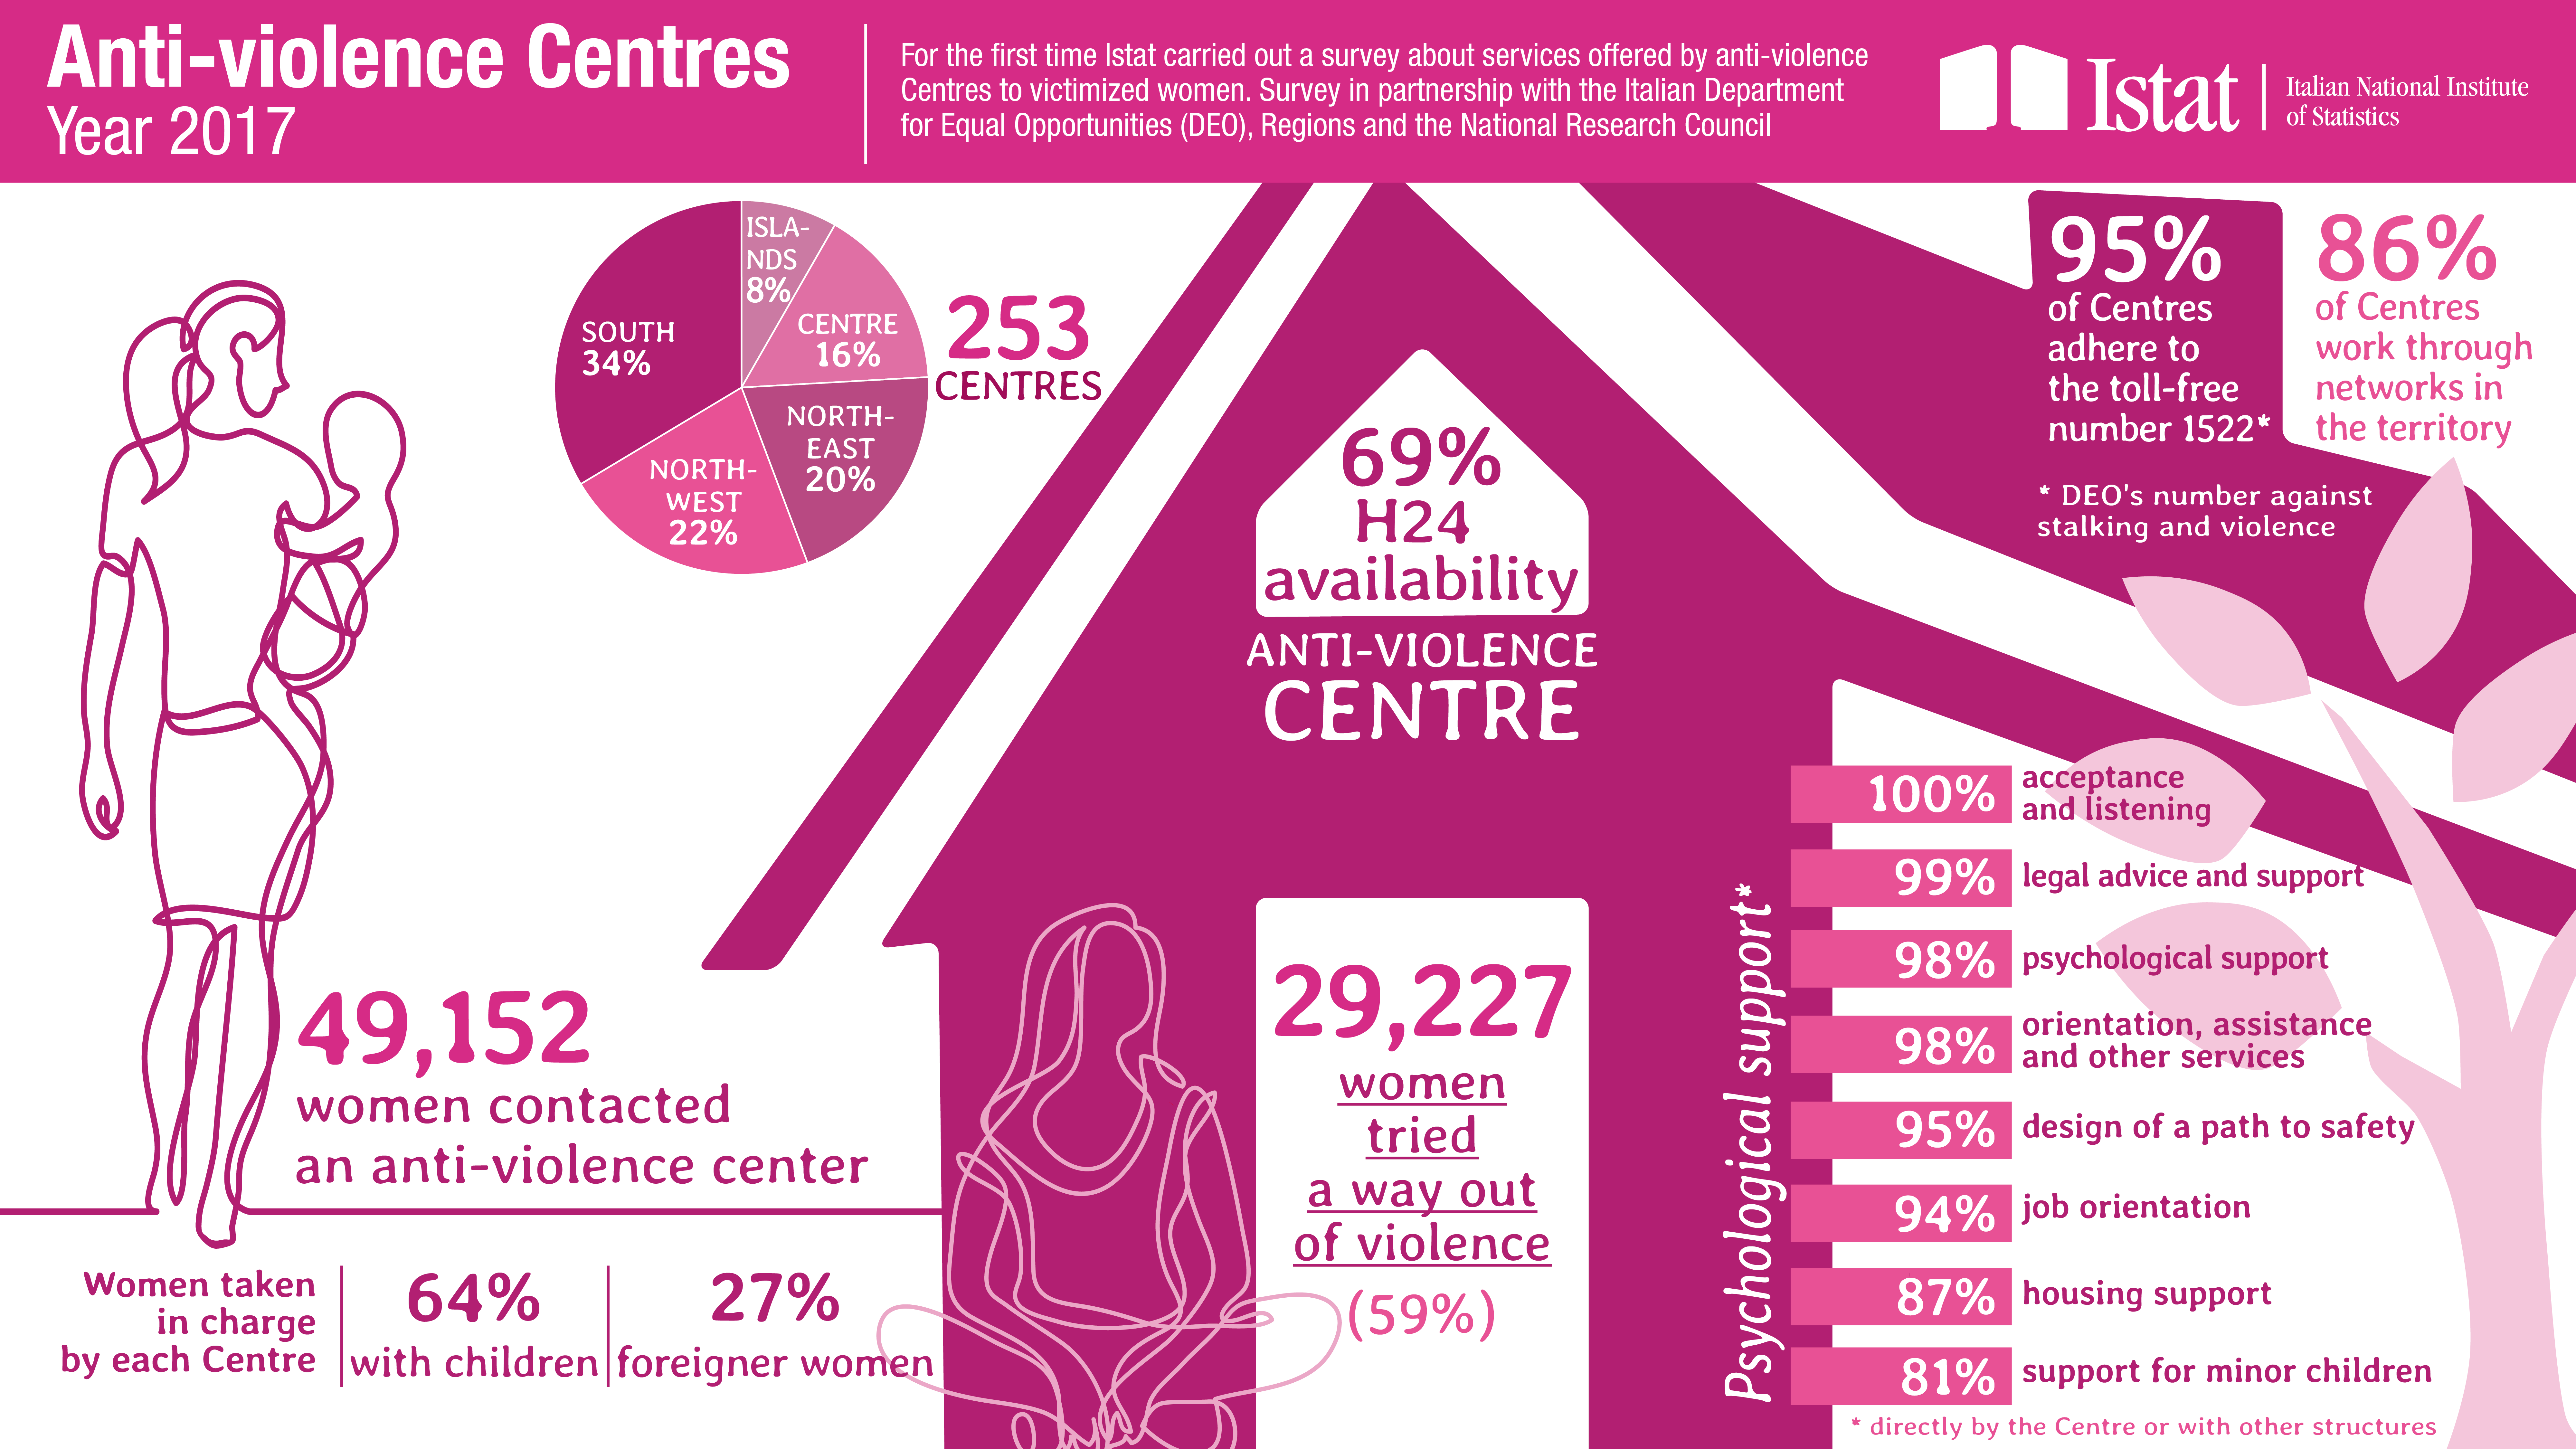 Infographic on Anti-violence Centres. Year 2017